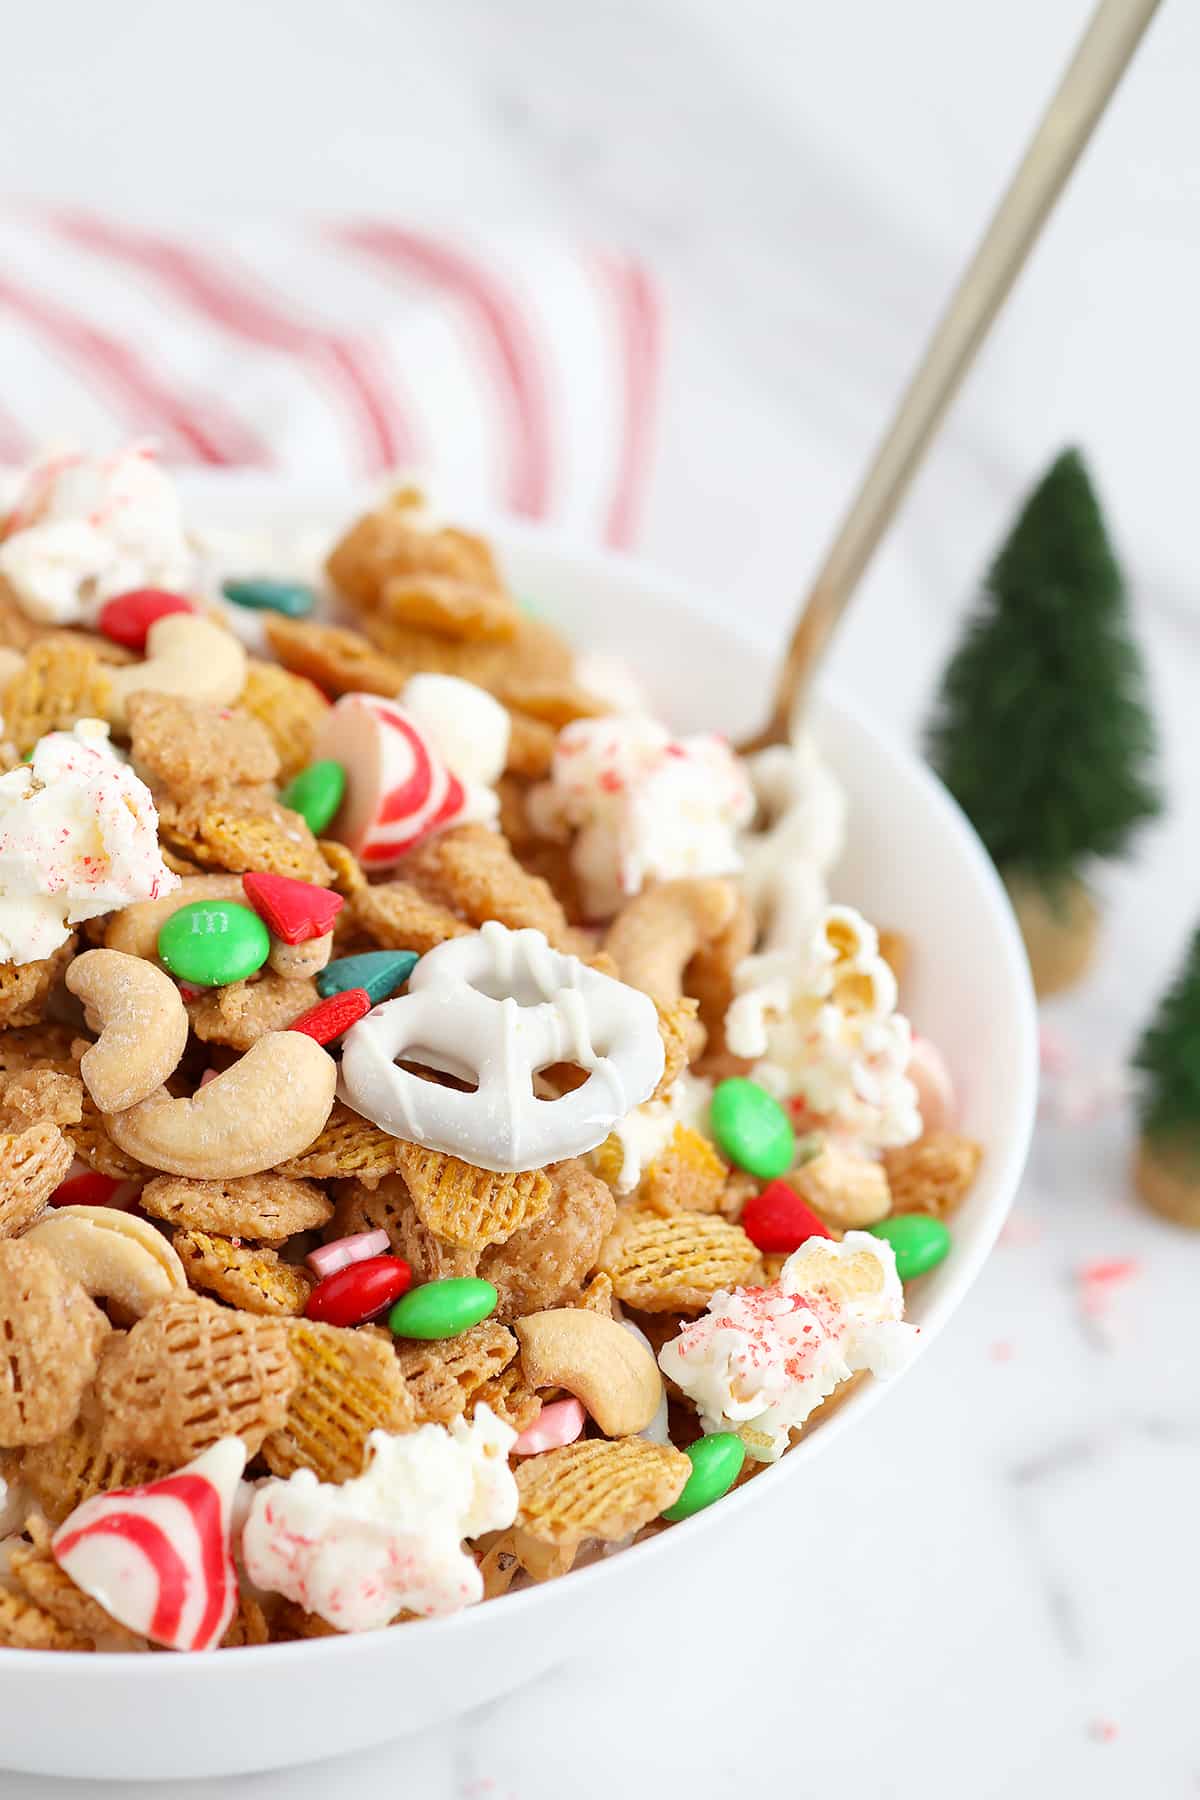 Chocolate covered pretzels, cashews, chex mix, popcorn, and candies tossed together in a white serving bowl with a large spoon. 